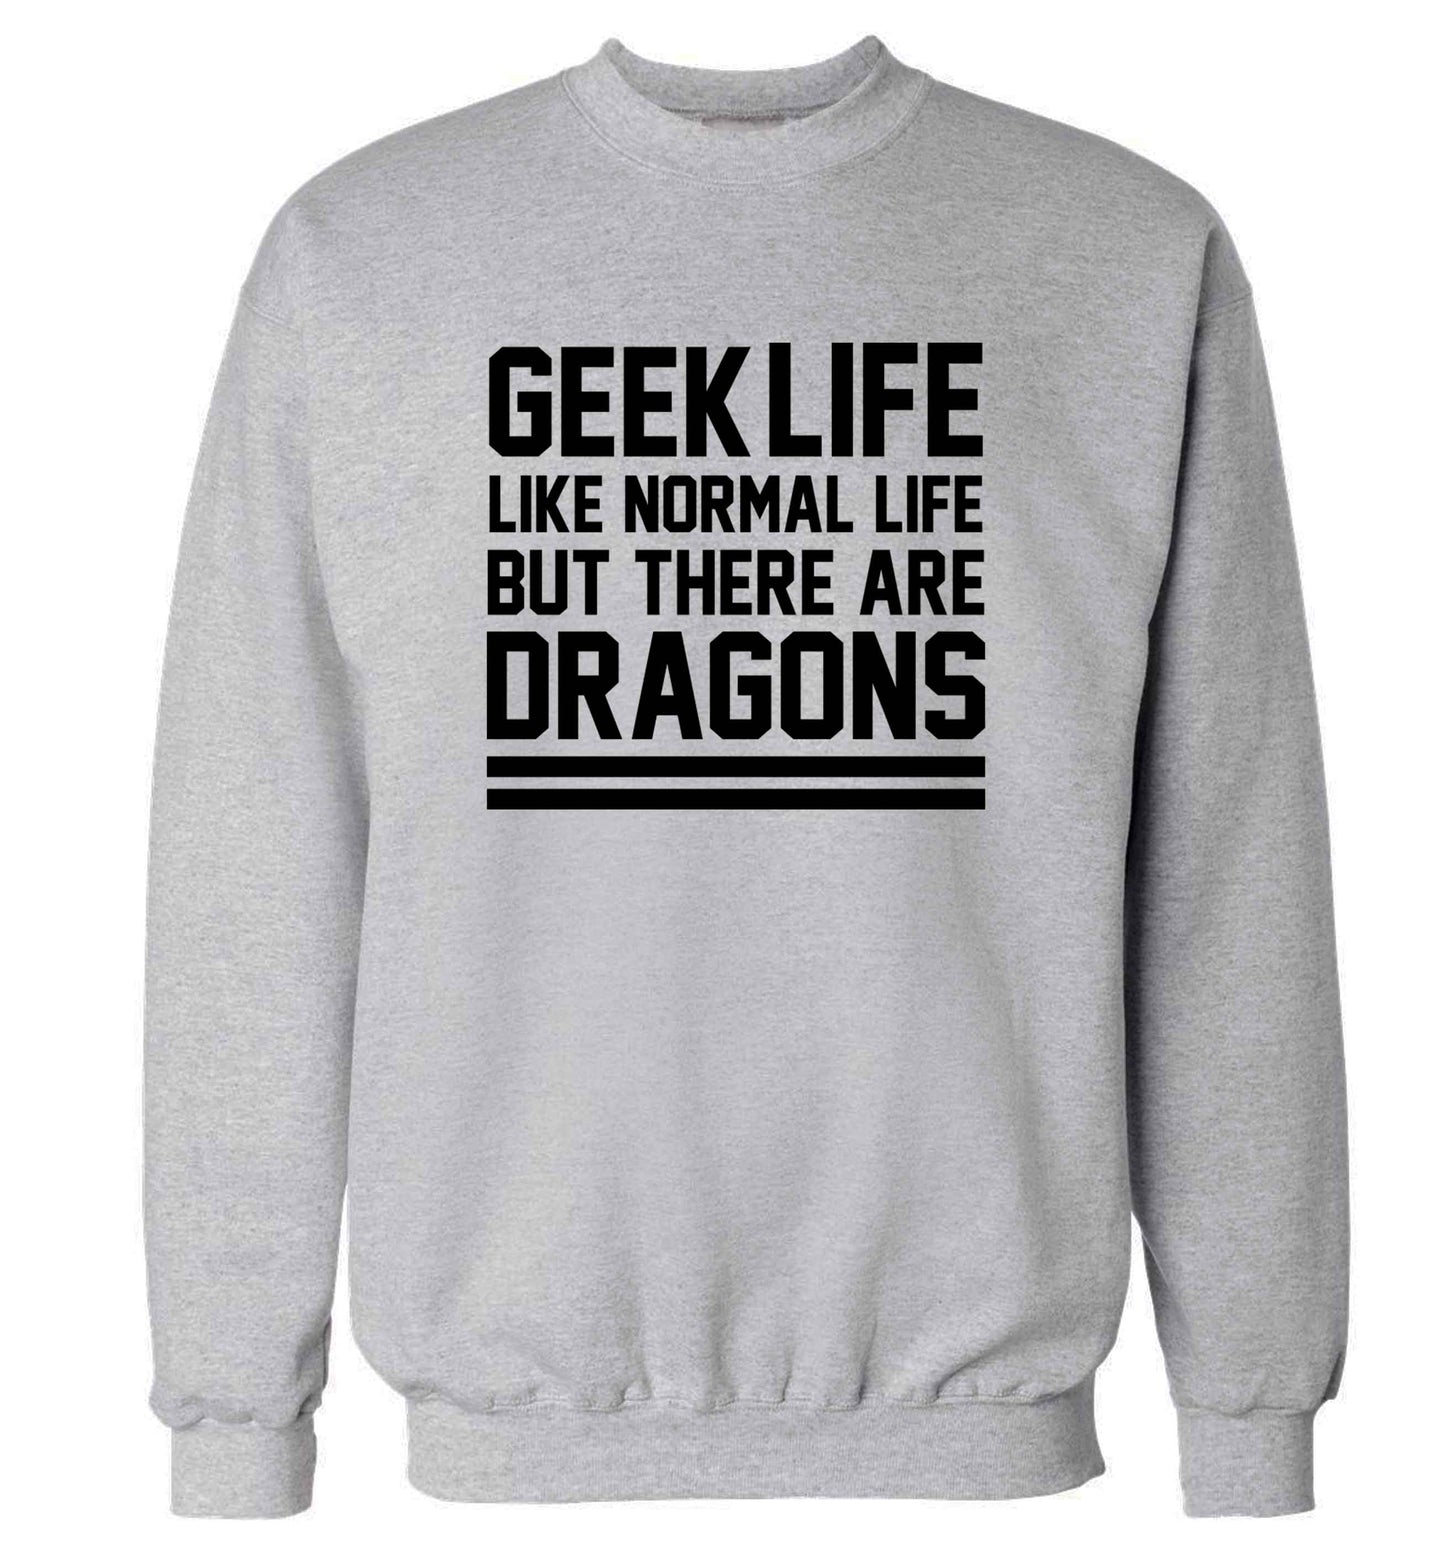 Geek life like normal life but there are dragons adult's unisex grey sweater 2XL